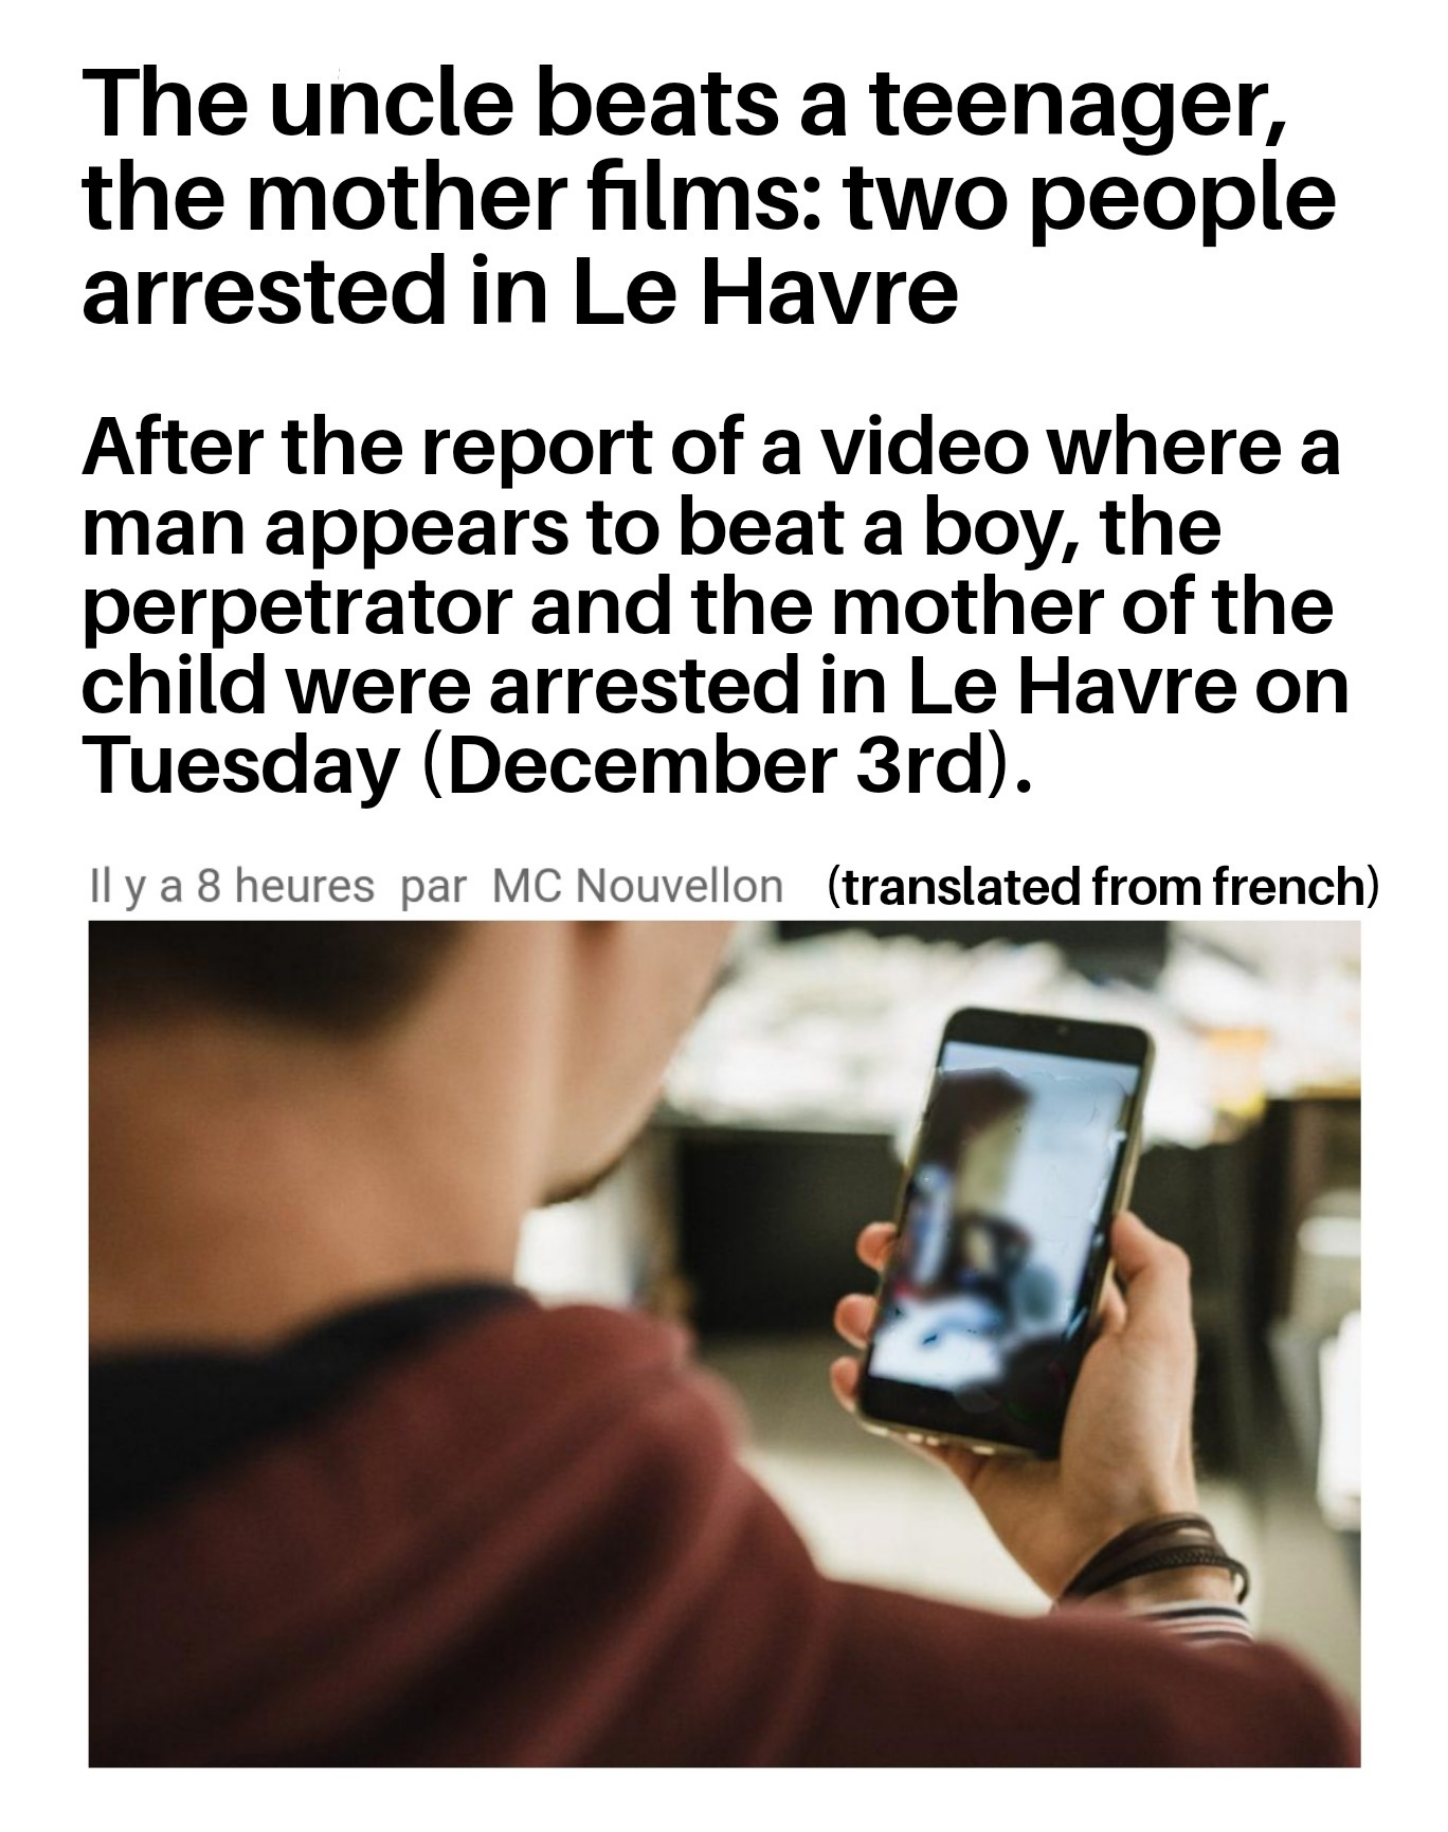 communication - The uncle beats a teenager, the mother films two people arrested in Le Havre After the report of a video where a man appears to beat a boy, the perpetrator and the mother of the child were arrested in Le Havre on Tuesday December 3rd. Il y